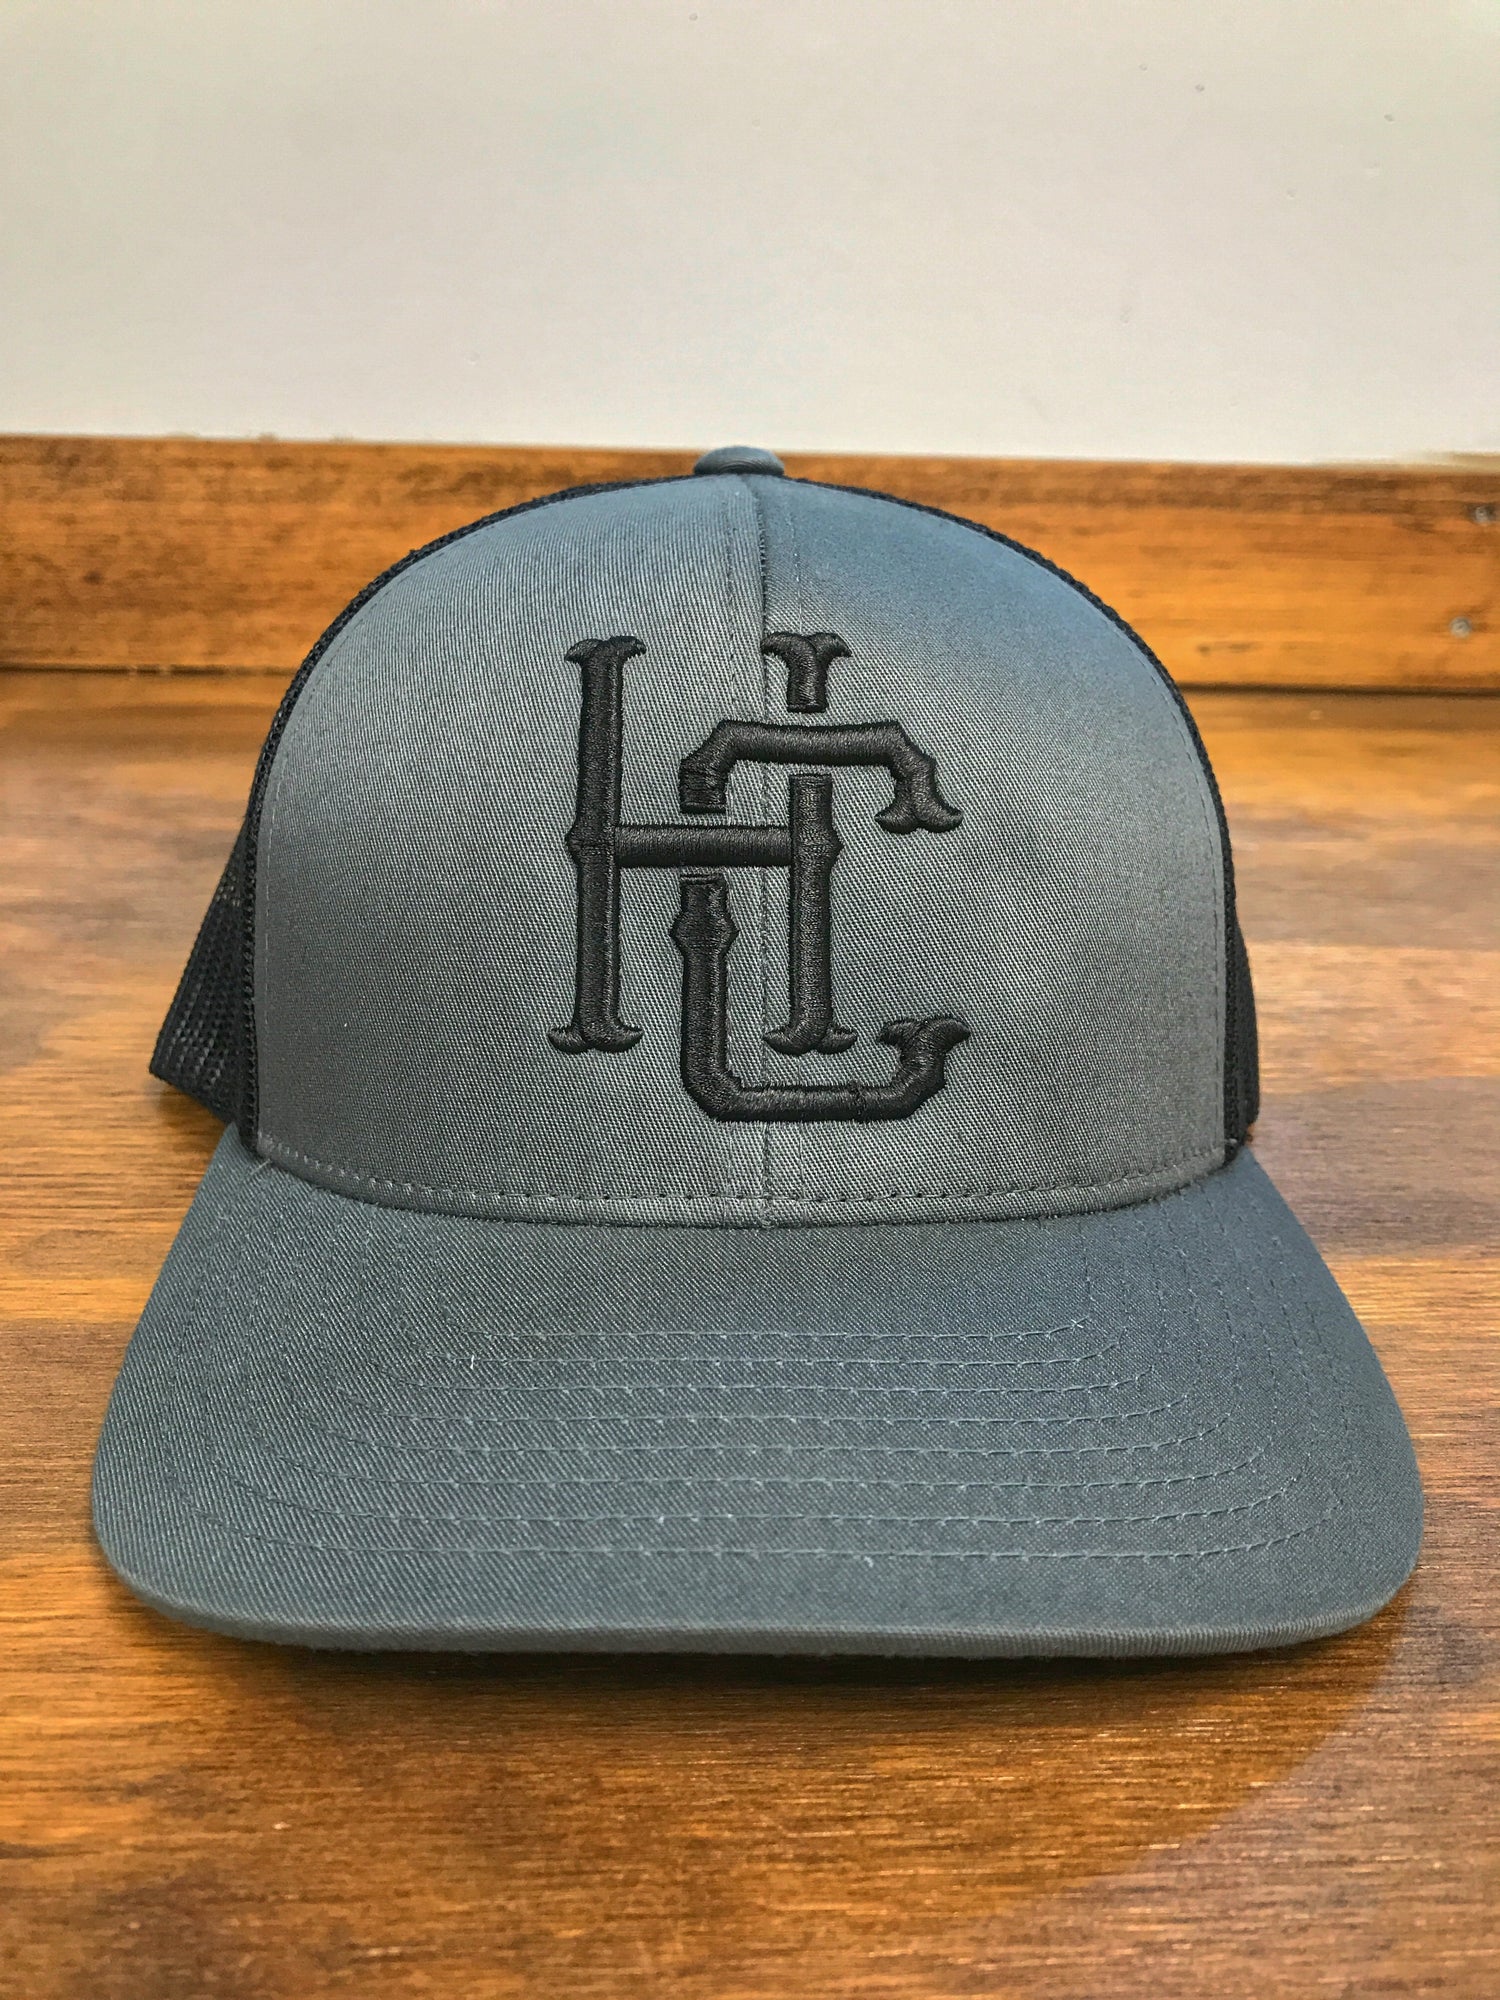 Hard Chargers FC Letter Snapback